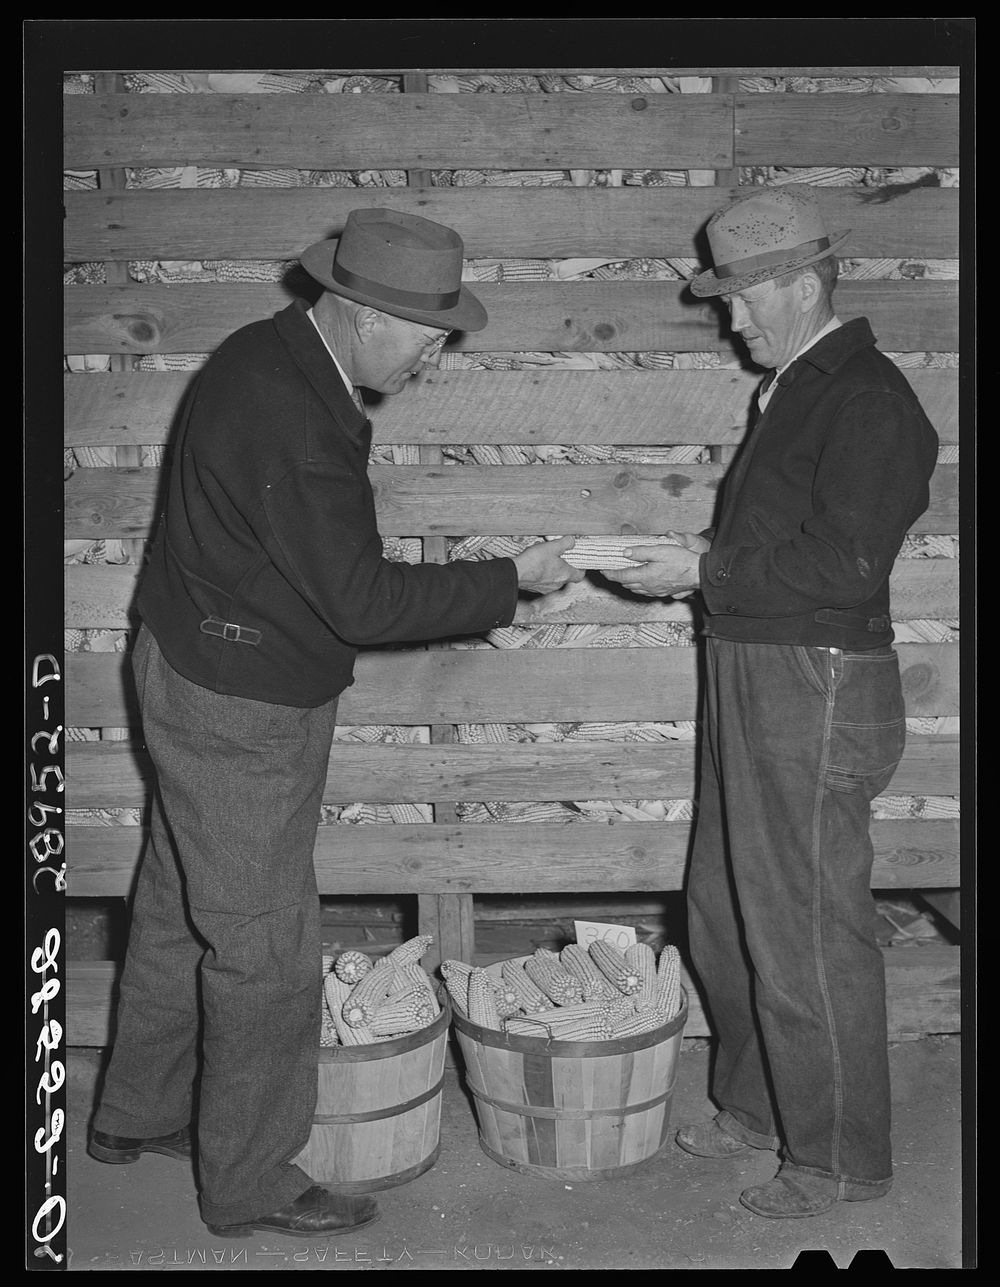 Hybrid corn salesman. Cornhusking contest. Marshall County, Iowa. Sourced from the Library of Congress.